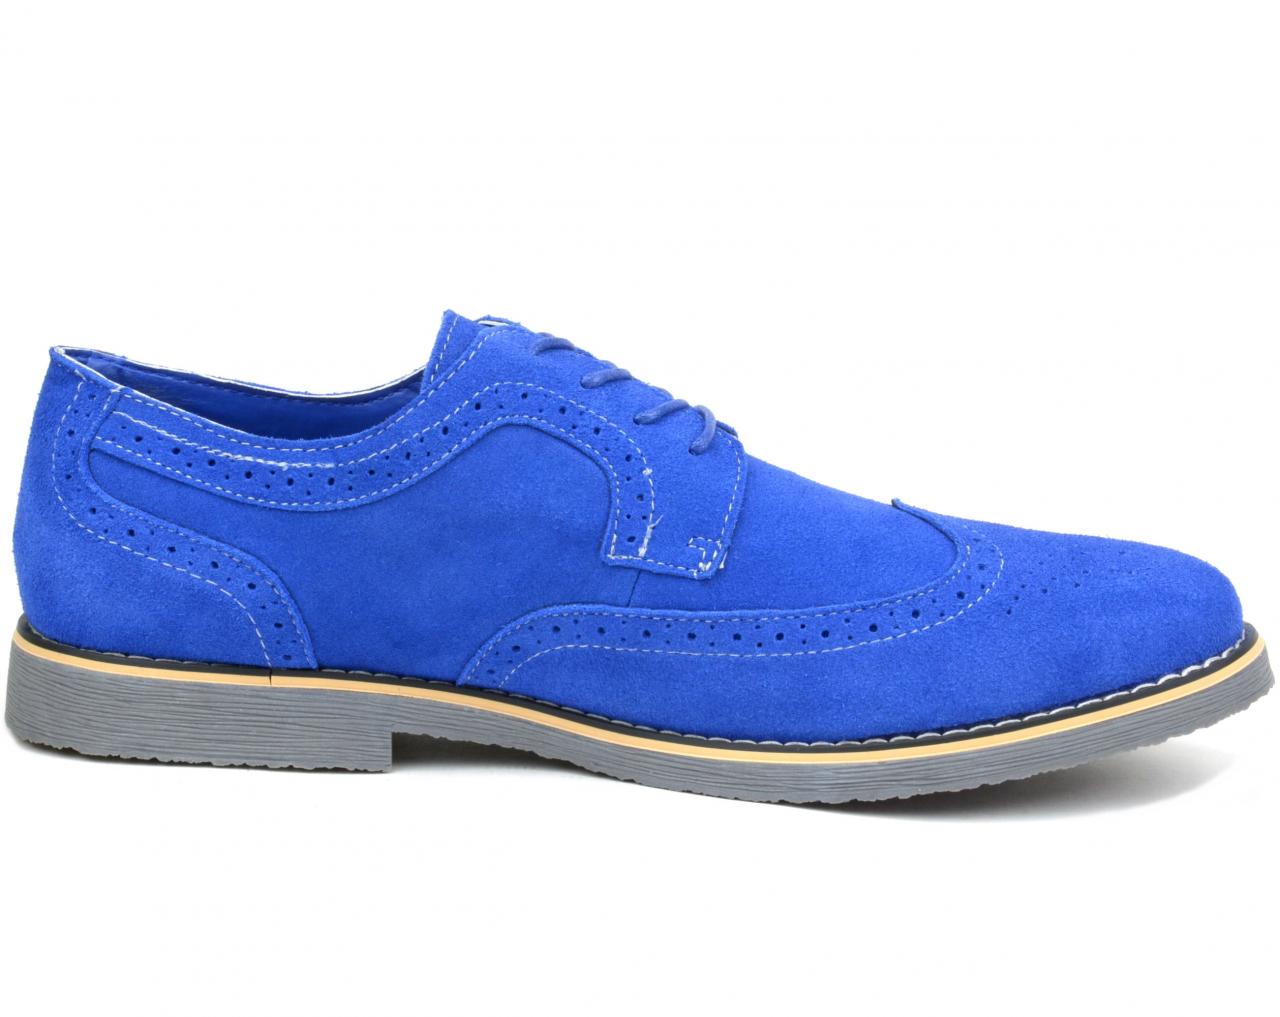 Handmade Blue Color Suede Shoes, Men's Wing Tip Lace Up Brogue Dress ...